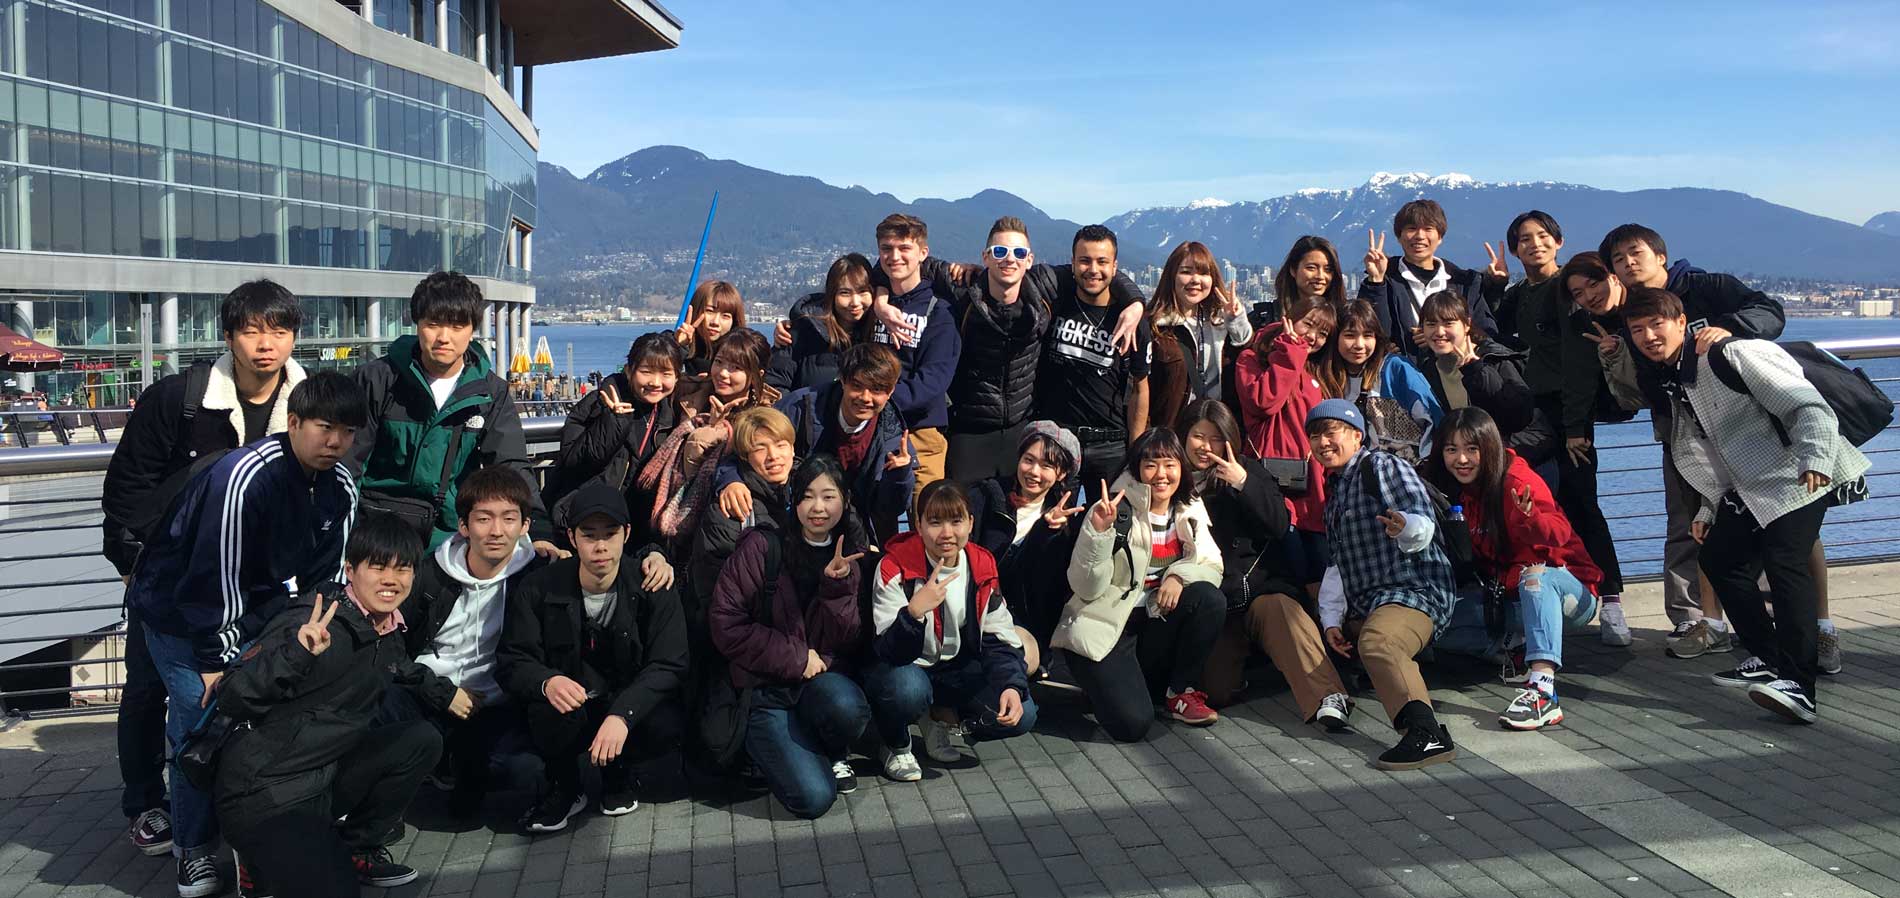 Group of students smiling on an excursion to Vancouver.